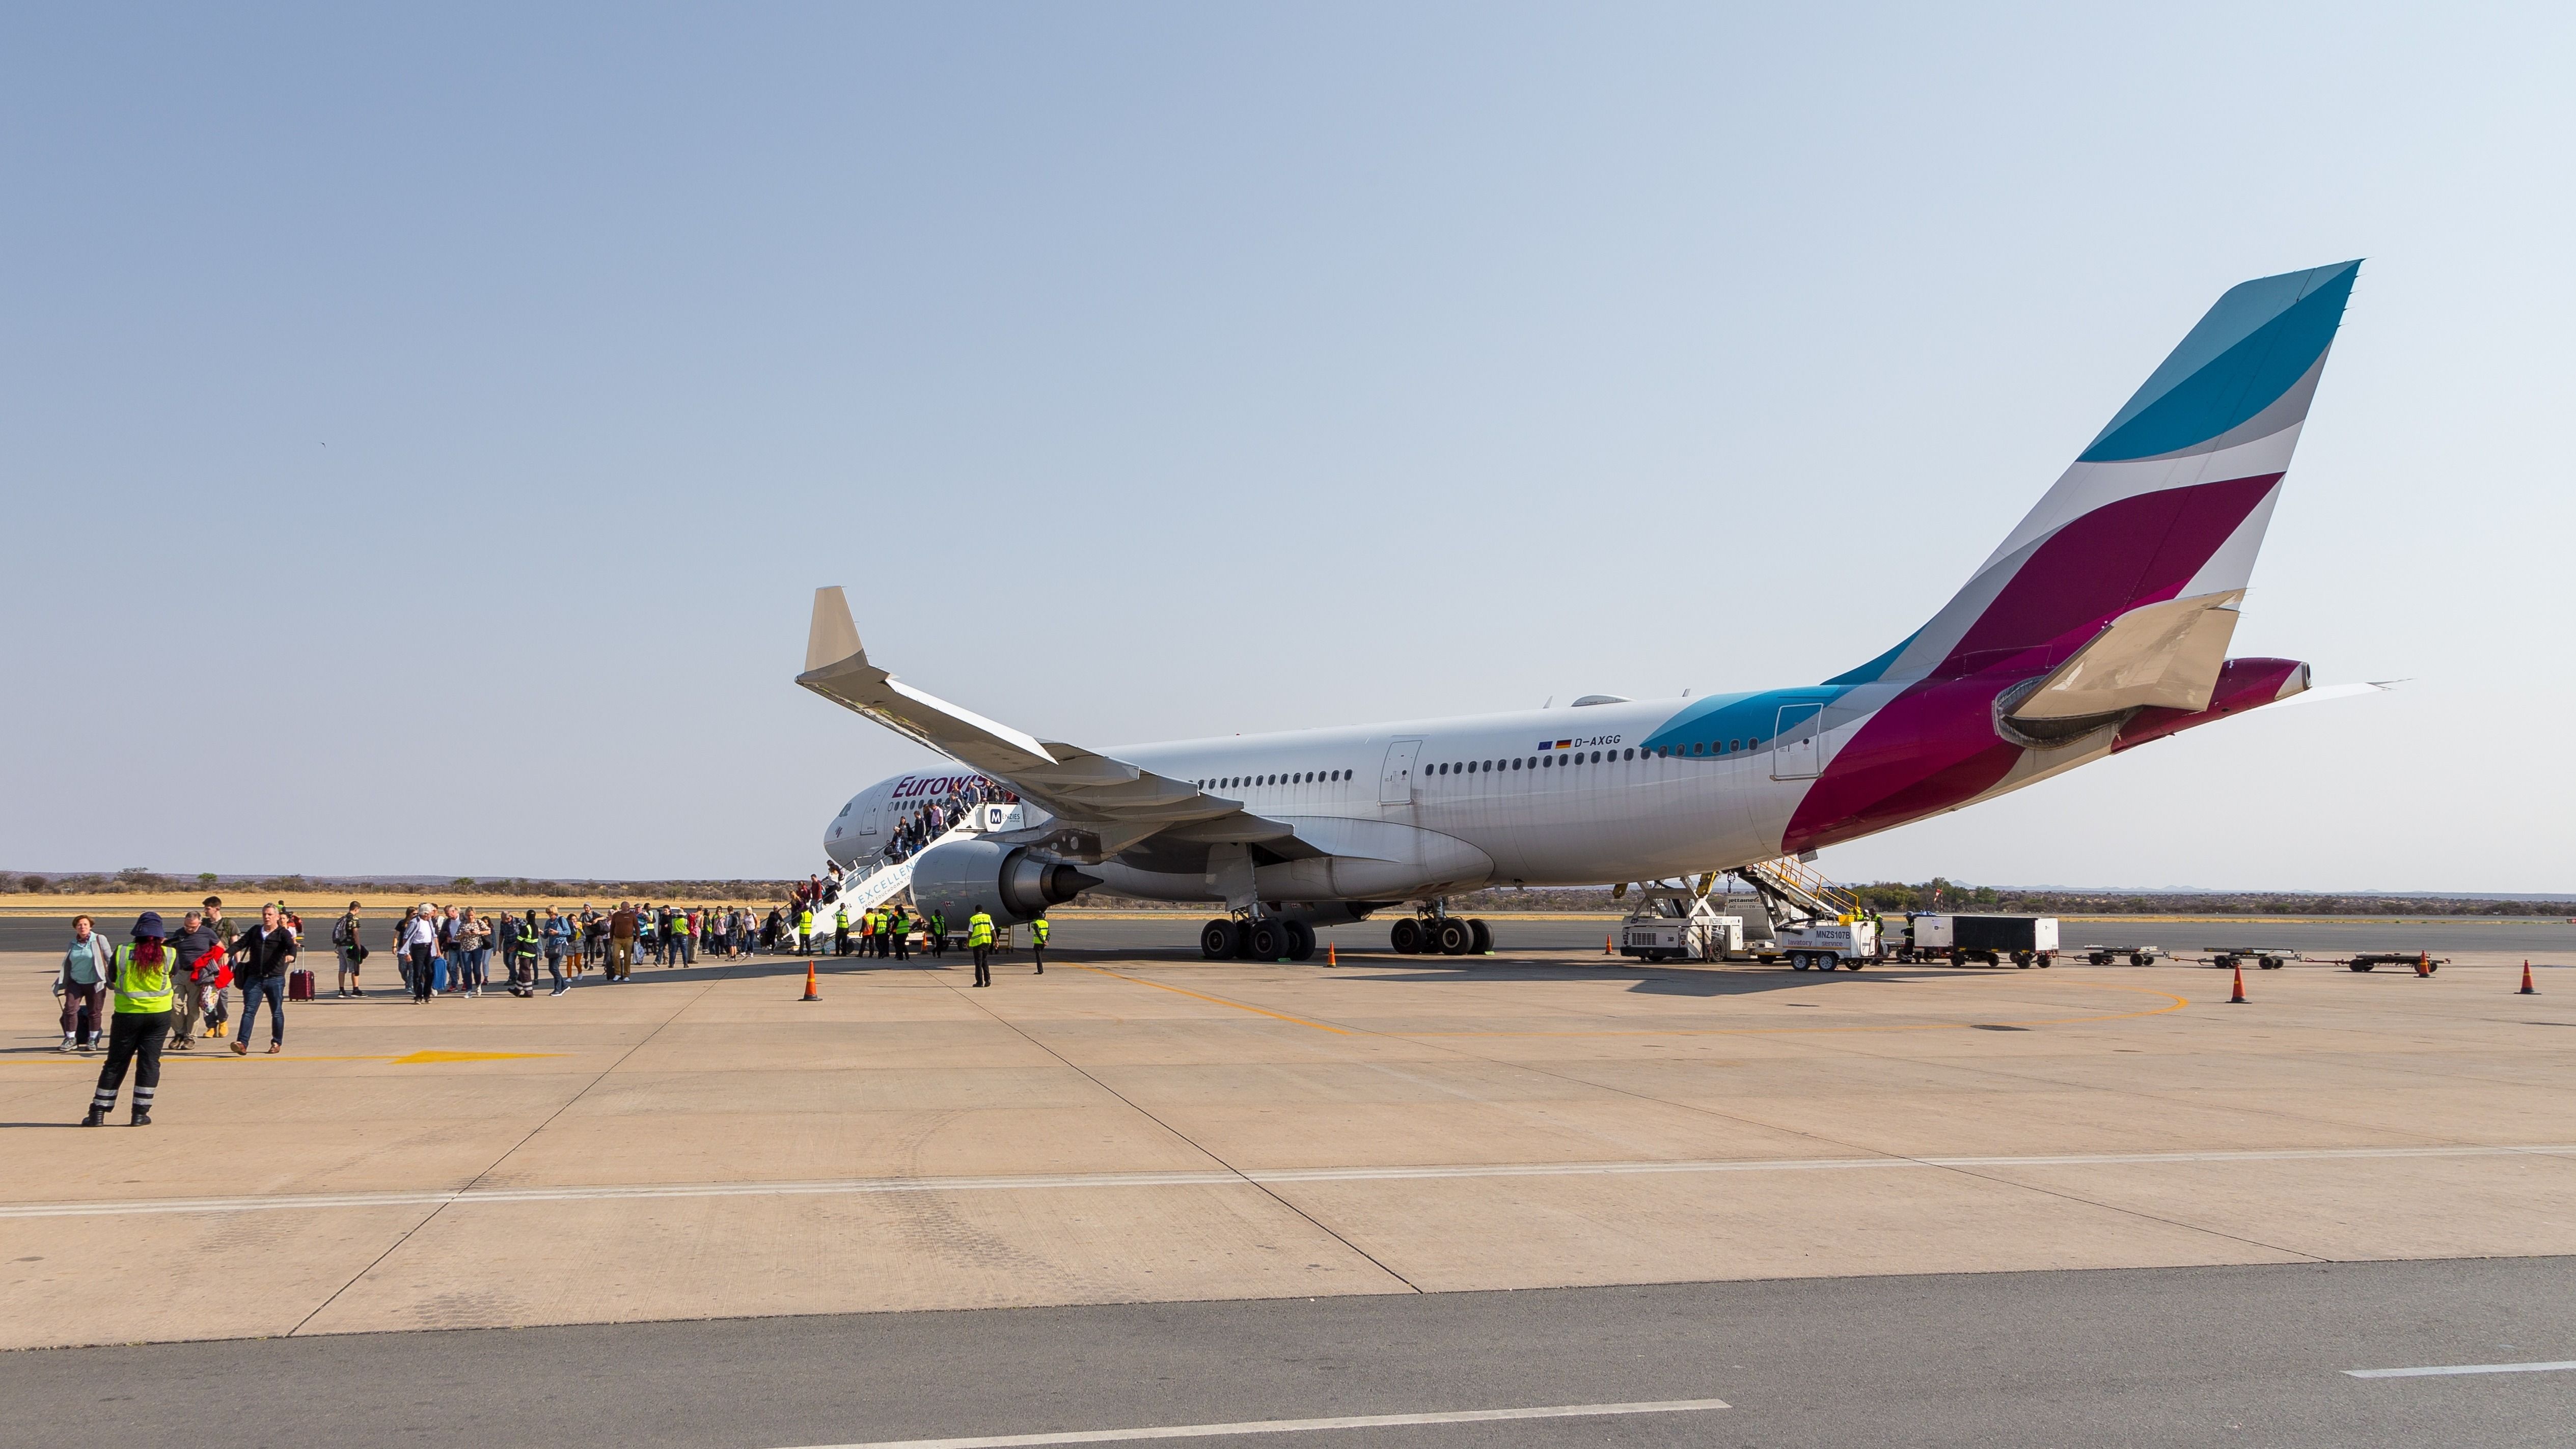 Eurowings Discover Airbus A330 at Windhoek Airport